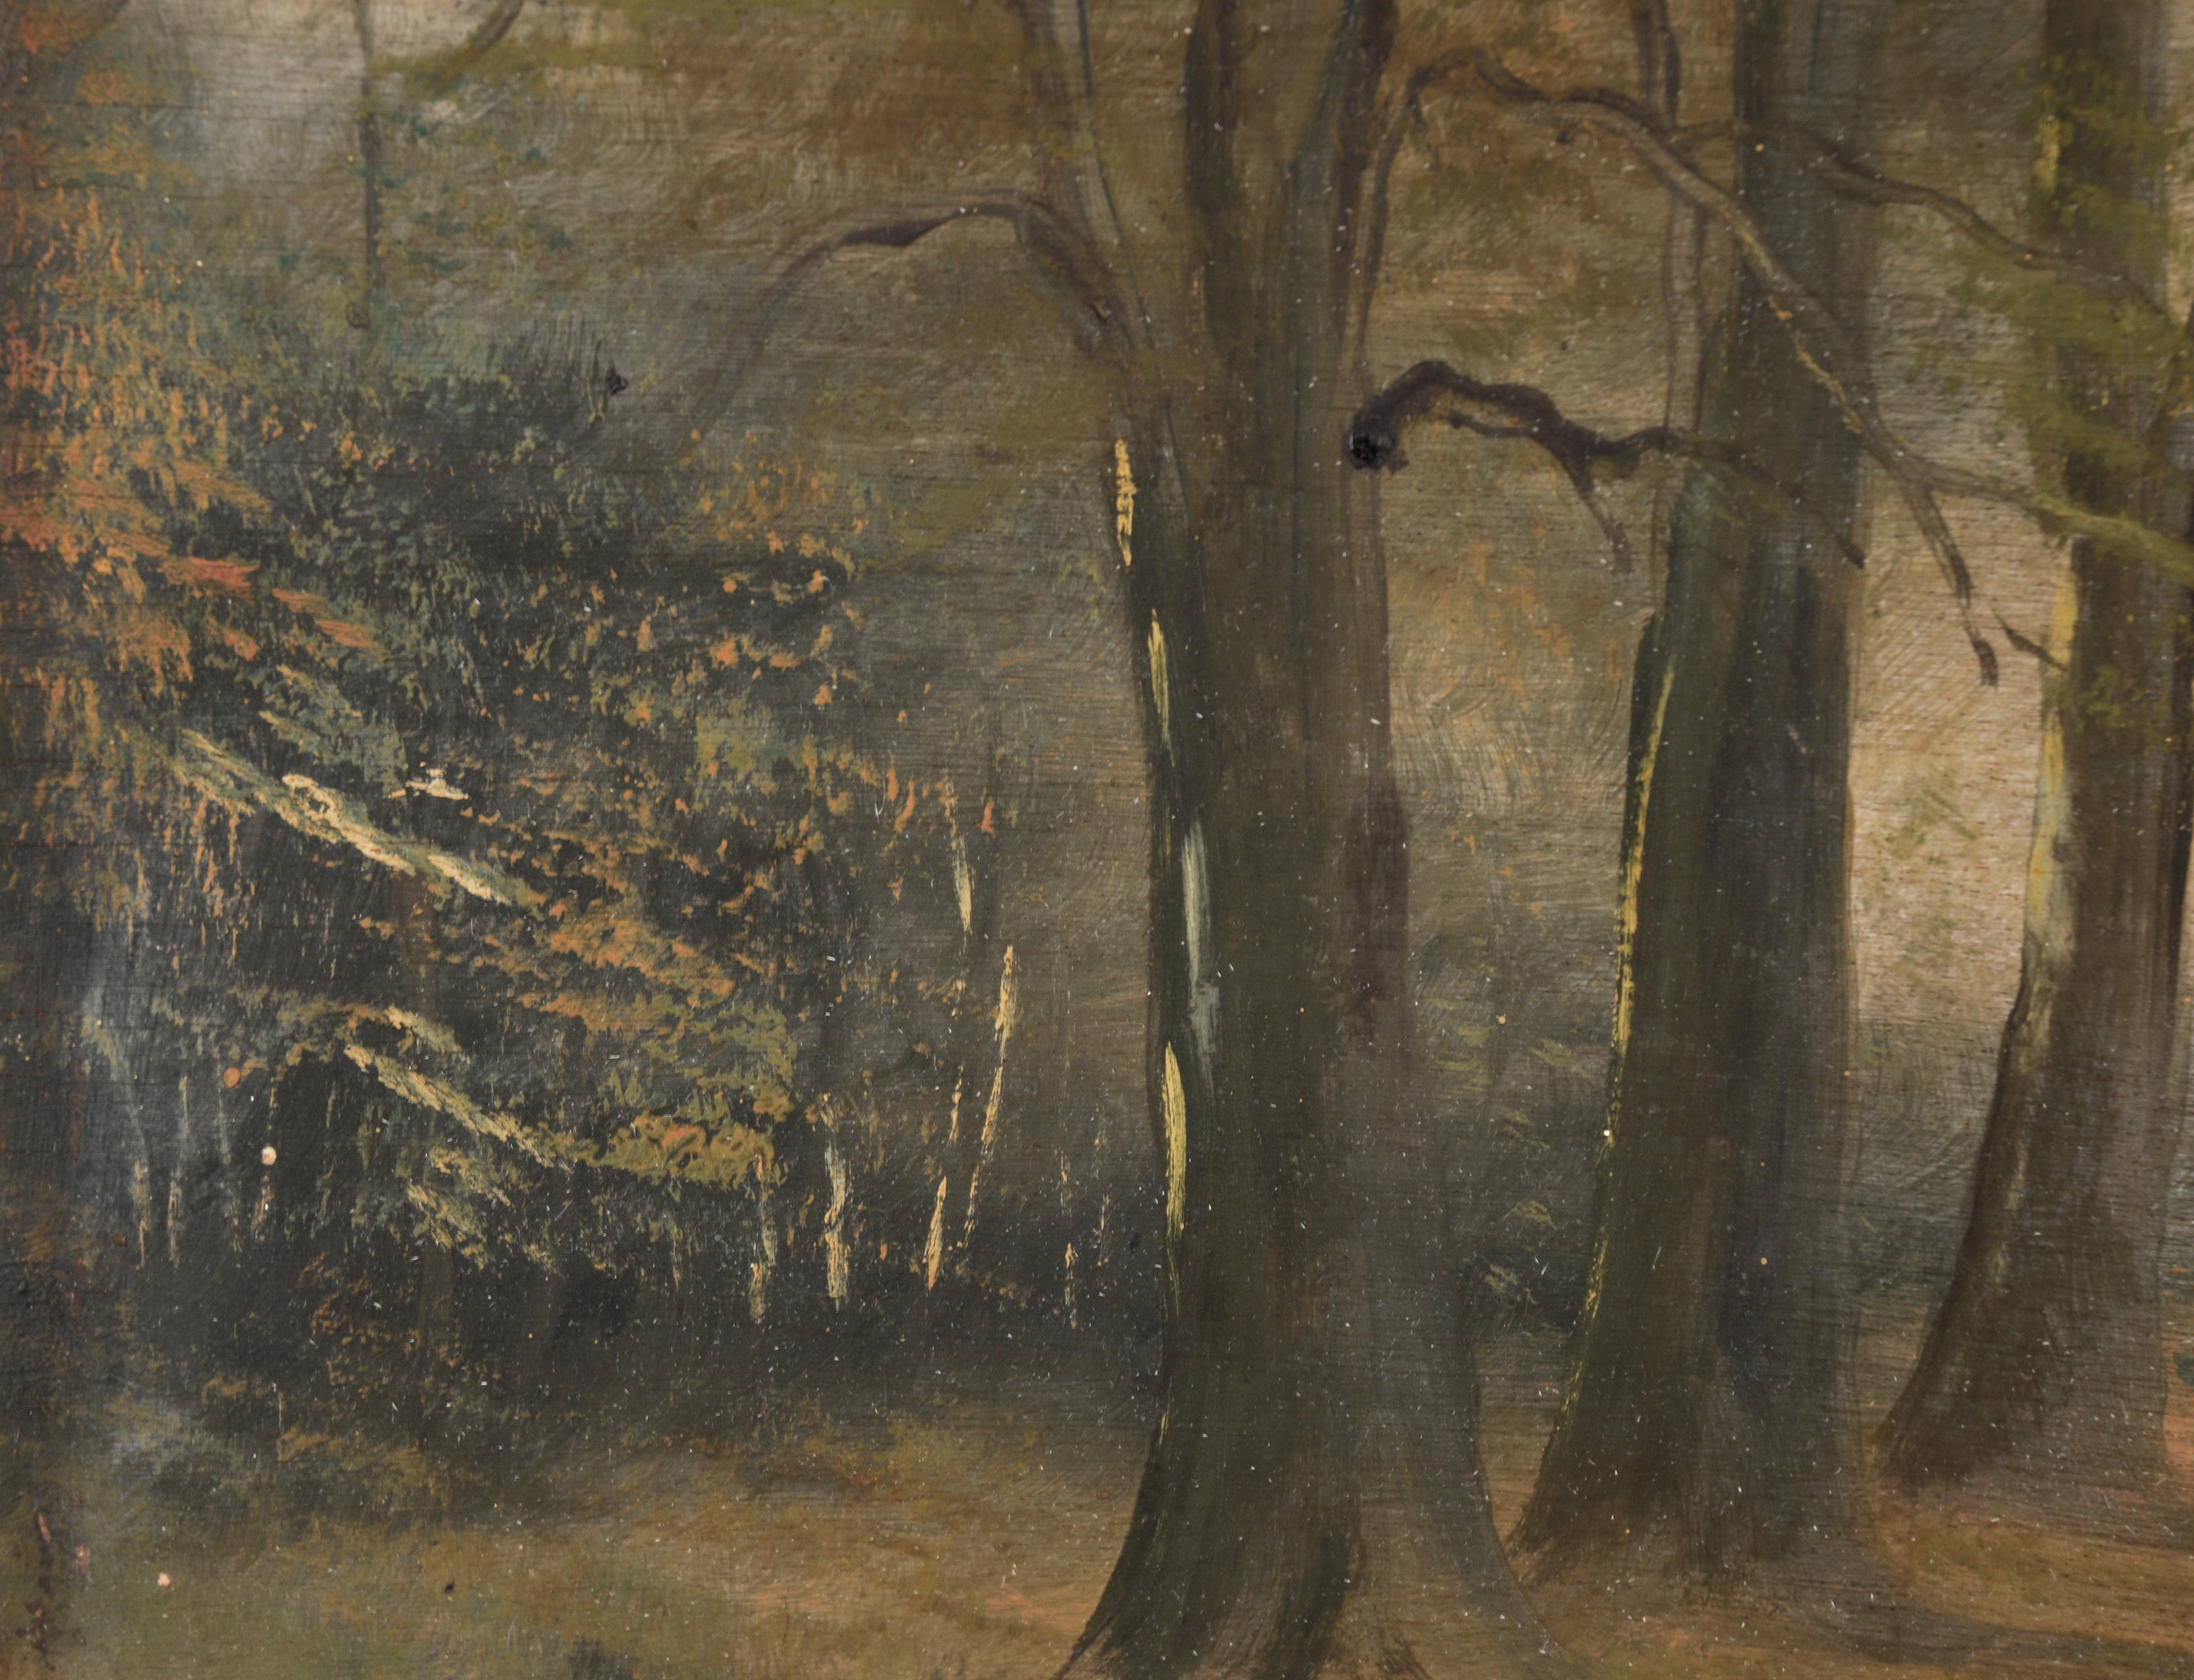 Horse Drawn Carriage in the Country Woods - Landscape in Oil on Wood Panel 1